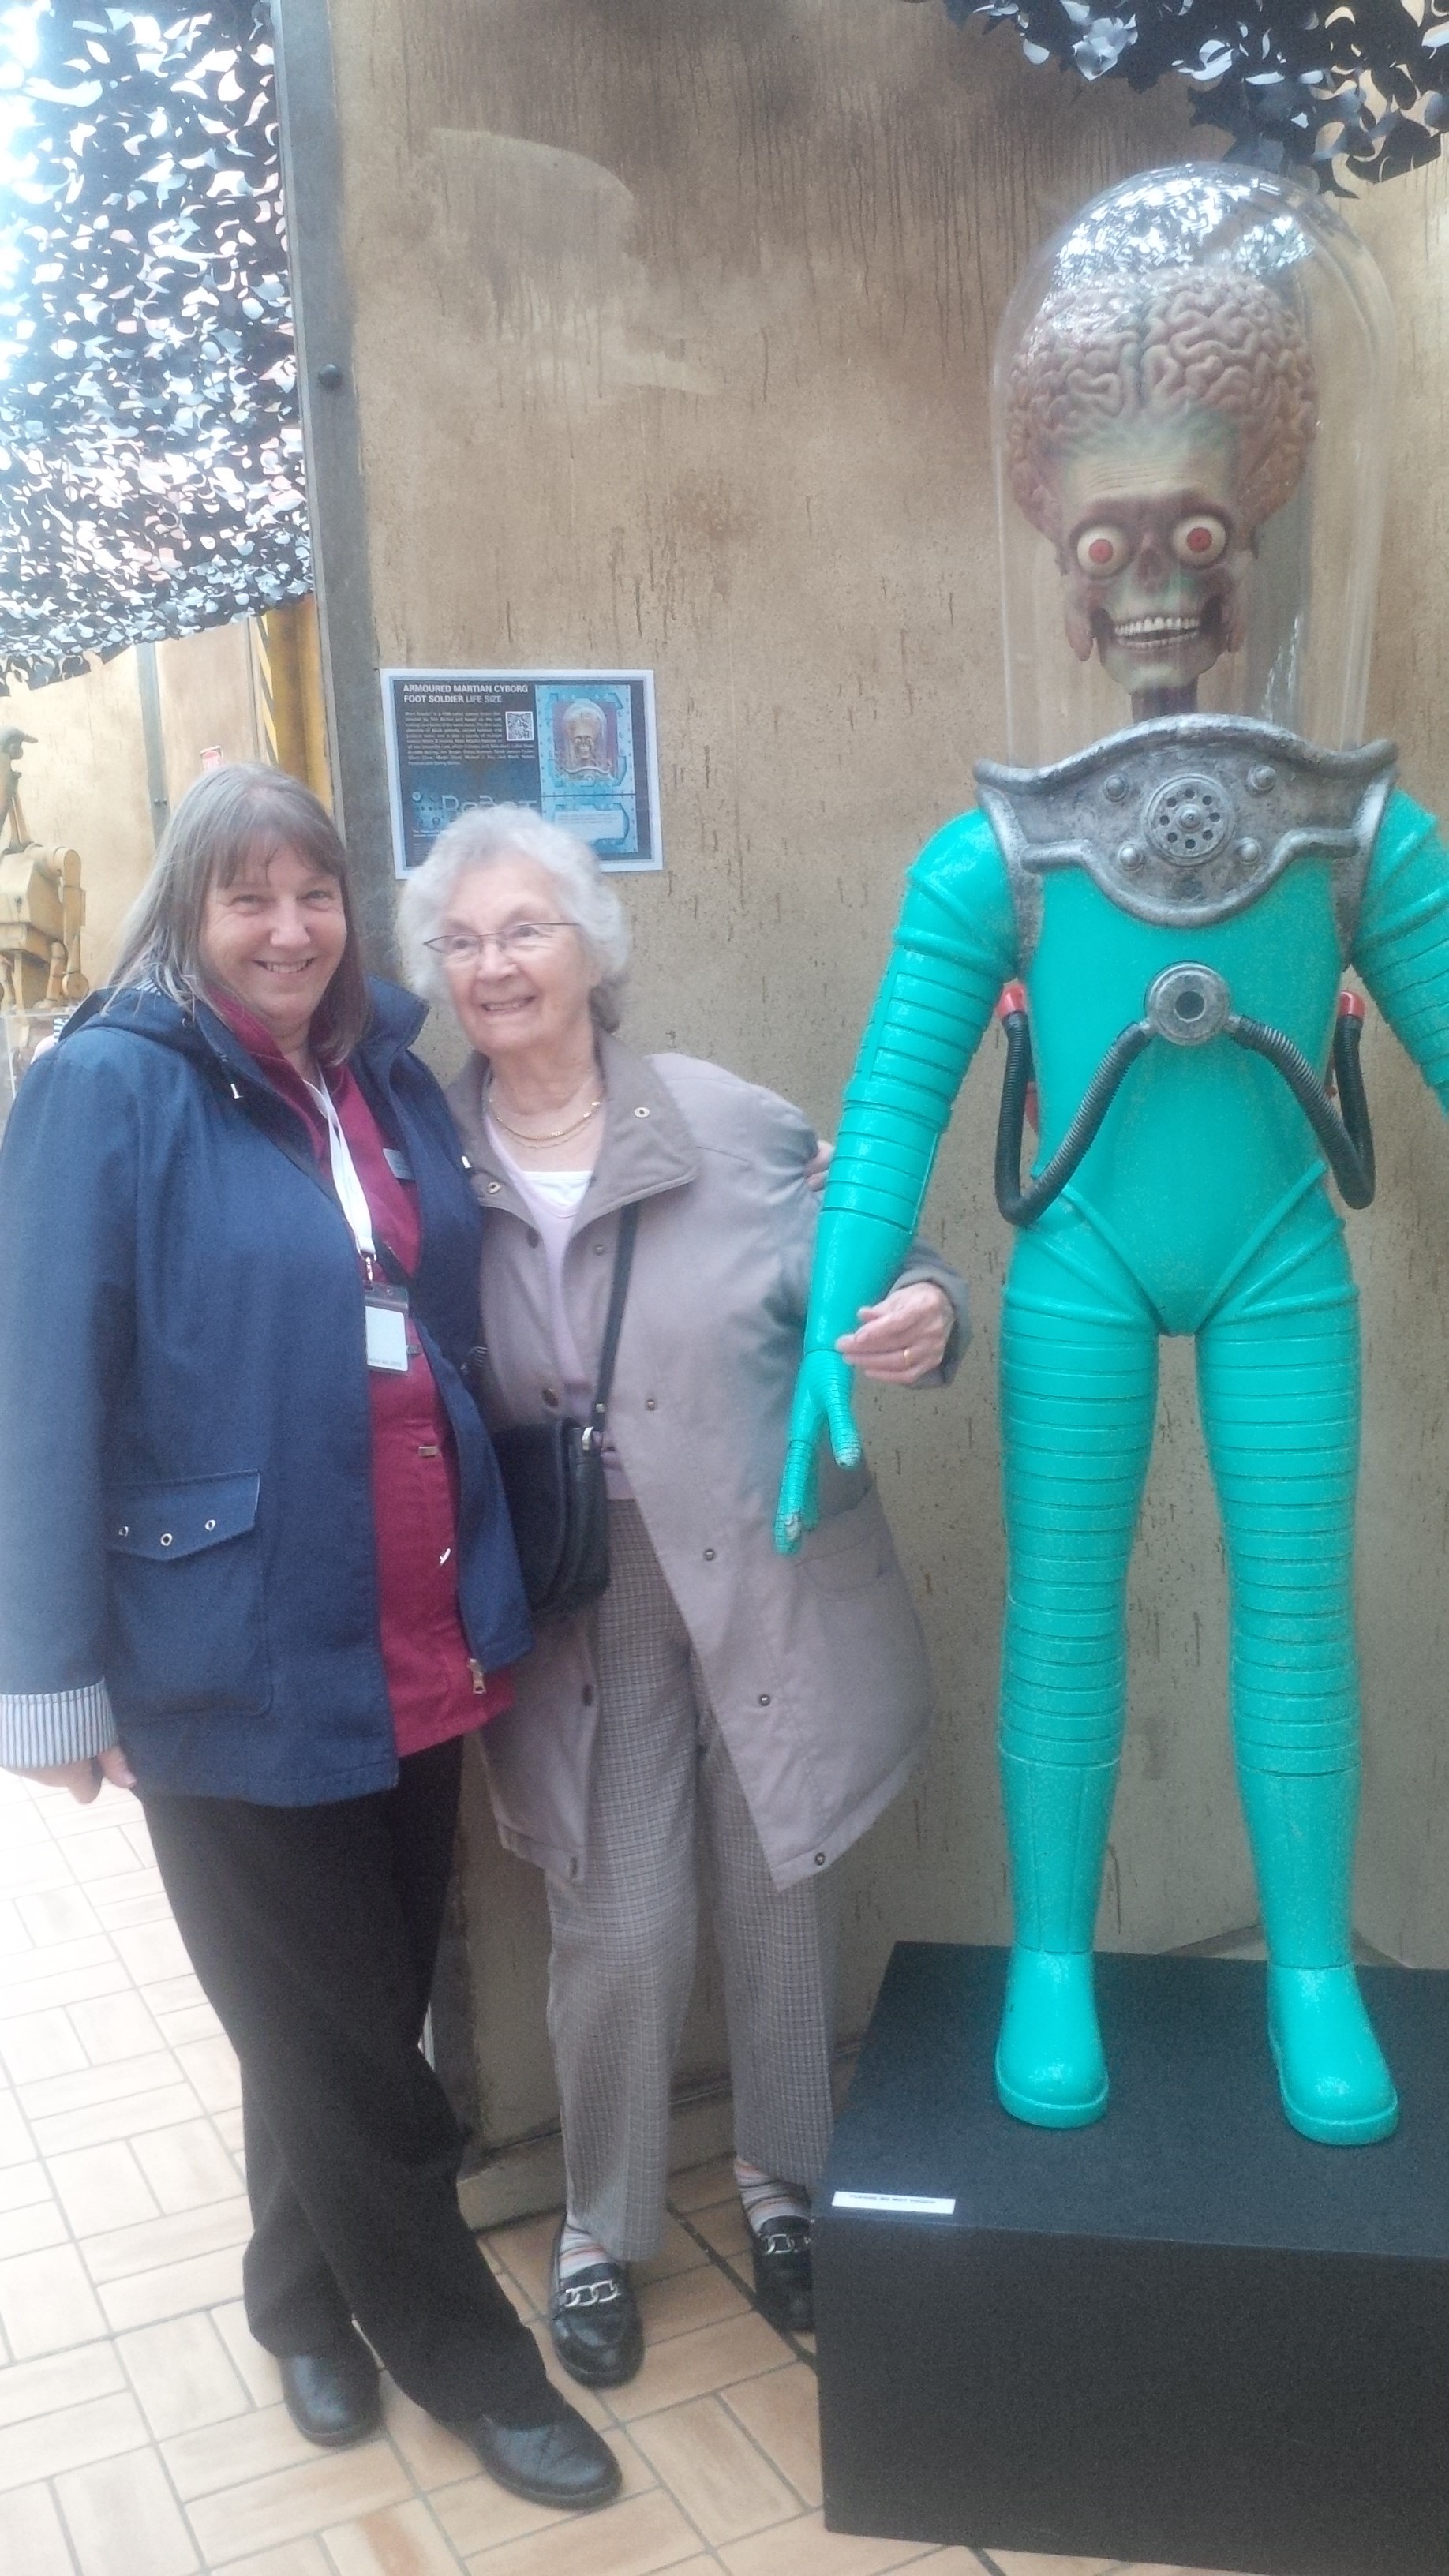 Robots at Kirkleatham Museum: Key Healthcare is dedicated to caring for elderly residents in safe. We have multiple dementia care homes including our care home middlesbrough, our care home St. Helen and care home saltburn. We excel in monitoring and improving care levels.